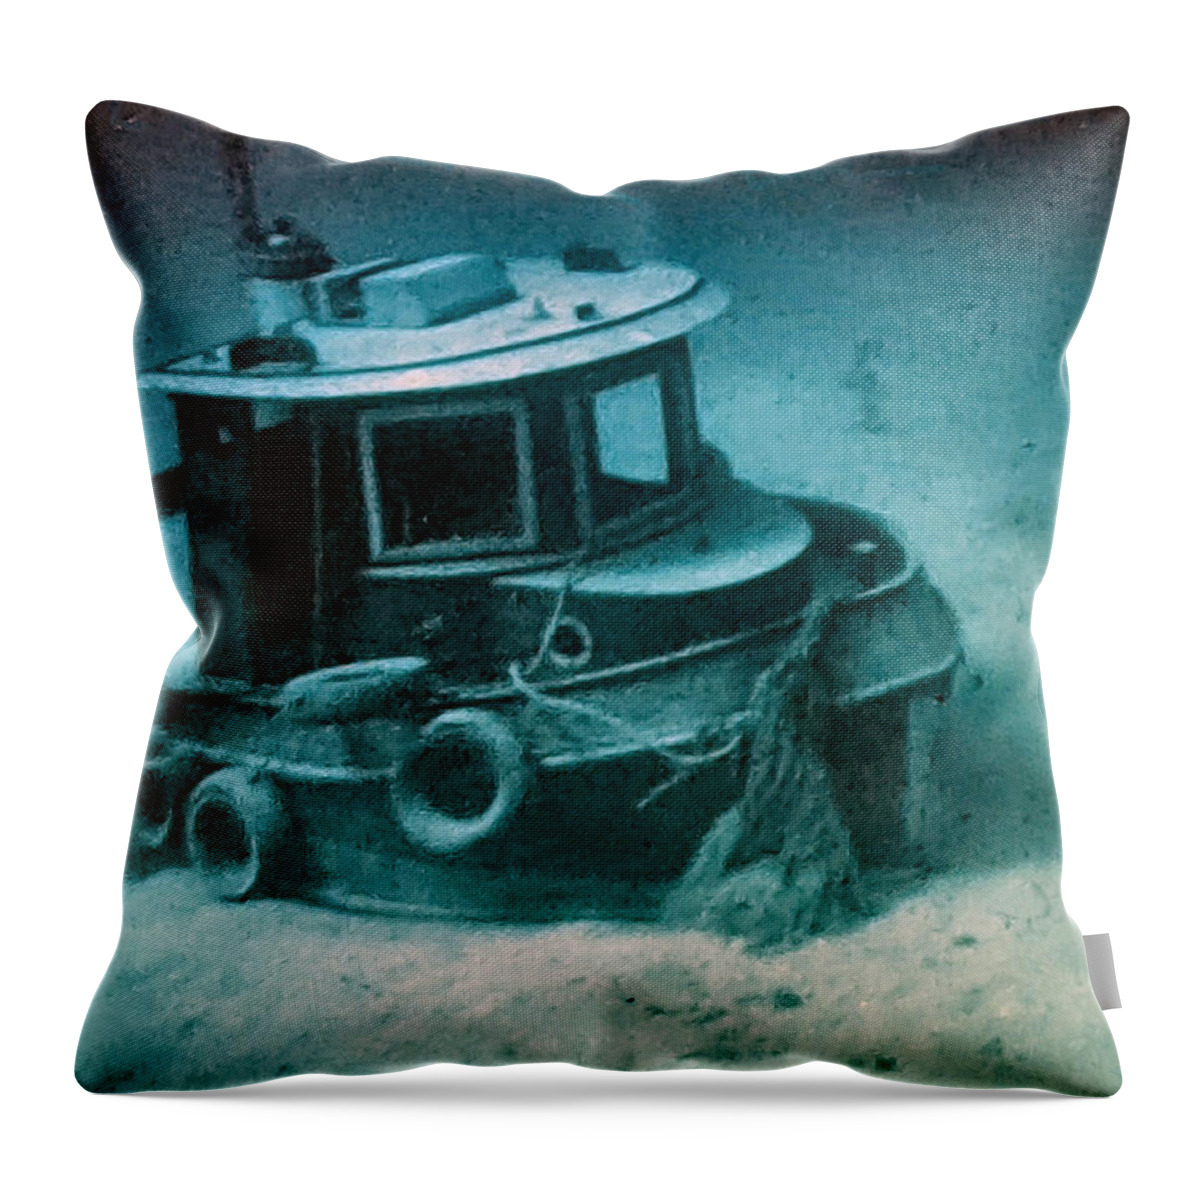 Grand Cayman Throw Pillow featuring the photograph Cayman's Smallest Tug by Lin Grosvenor